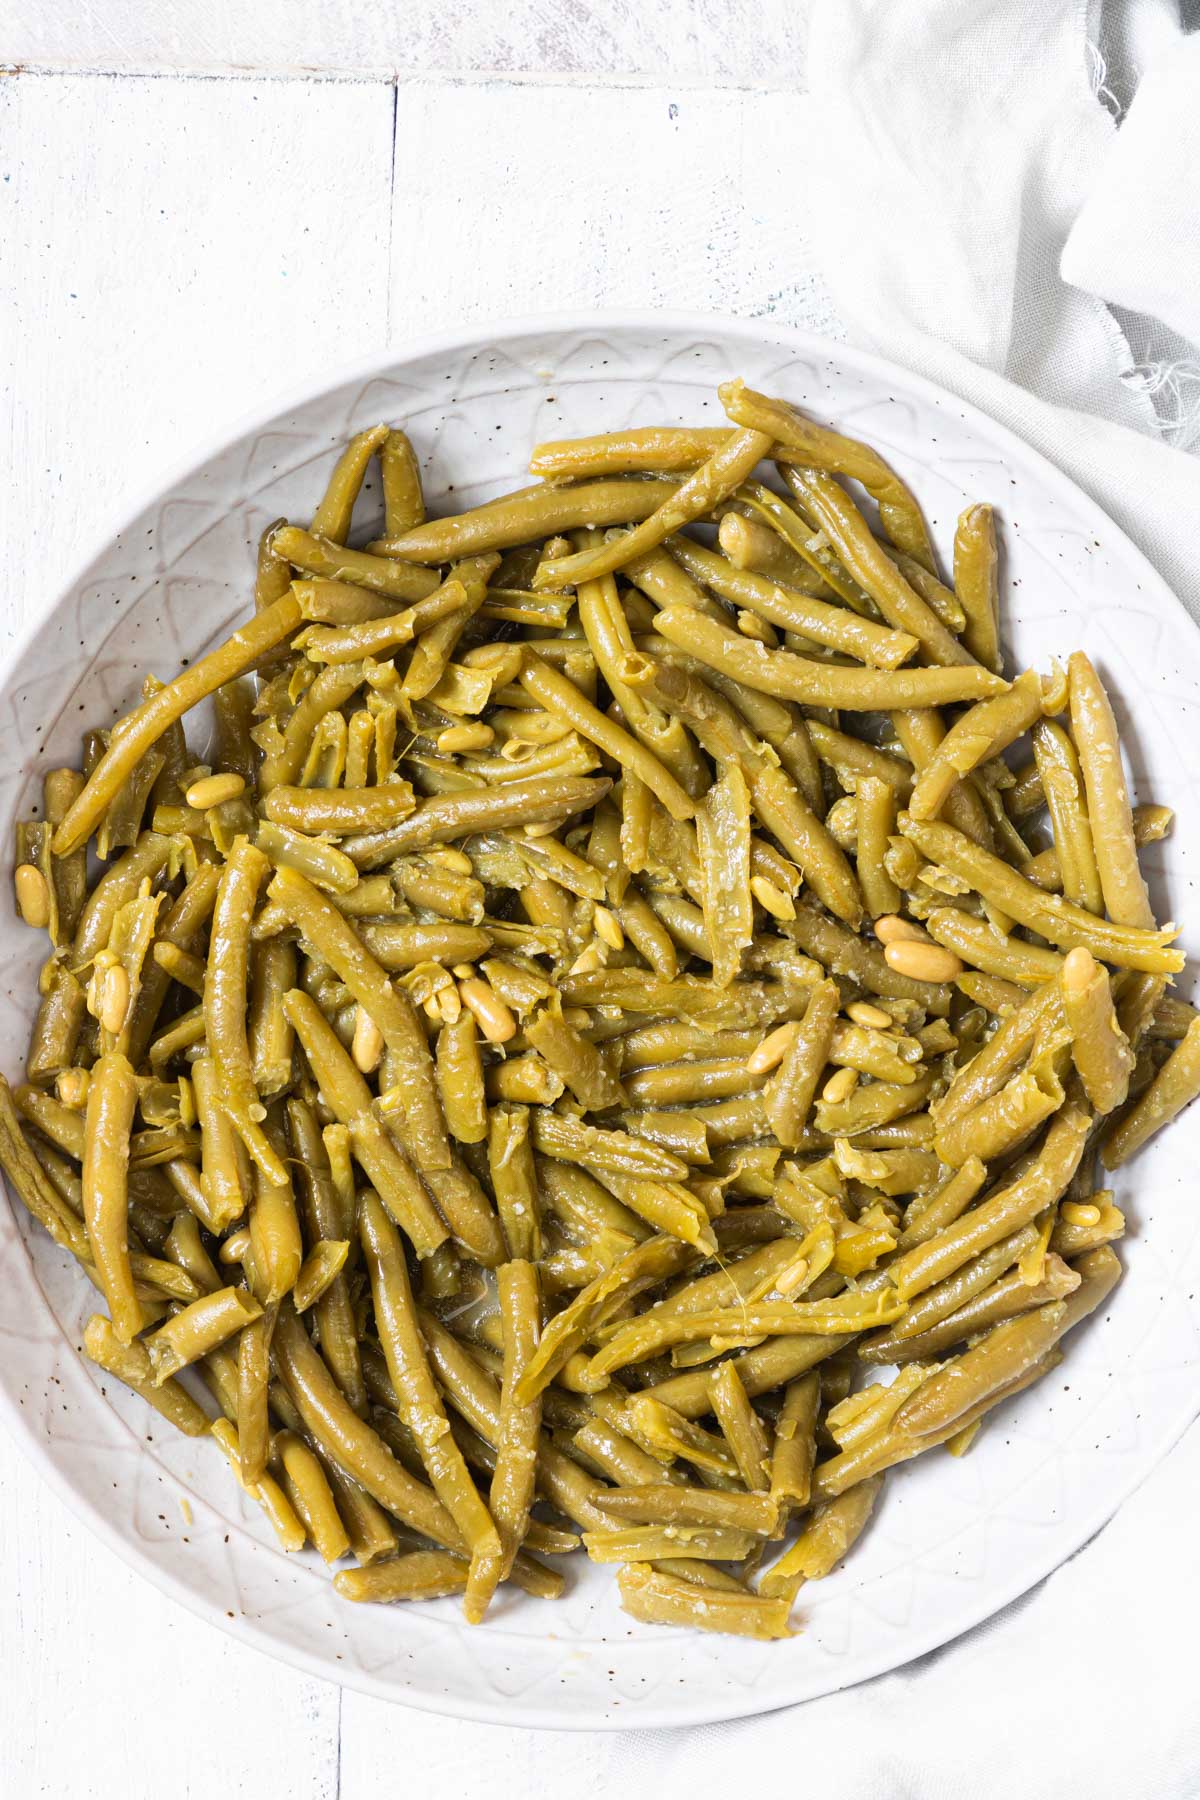 the finished how to cook canned green beans recipe